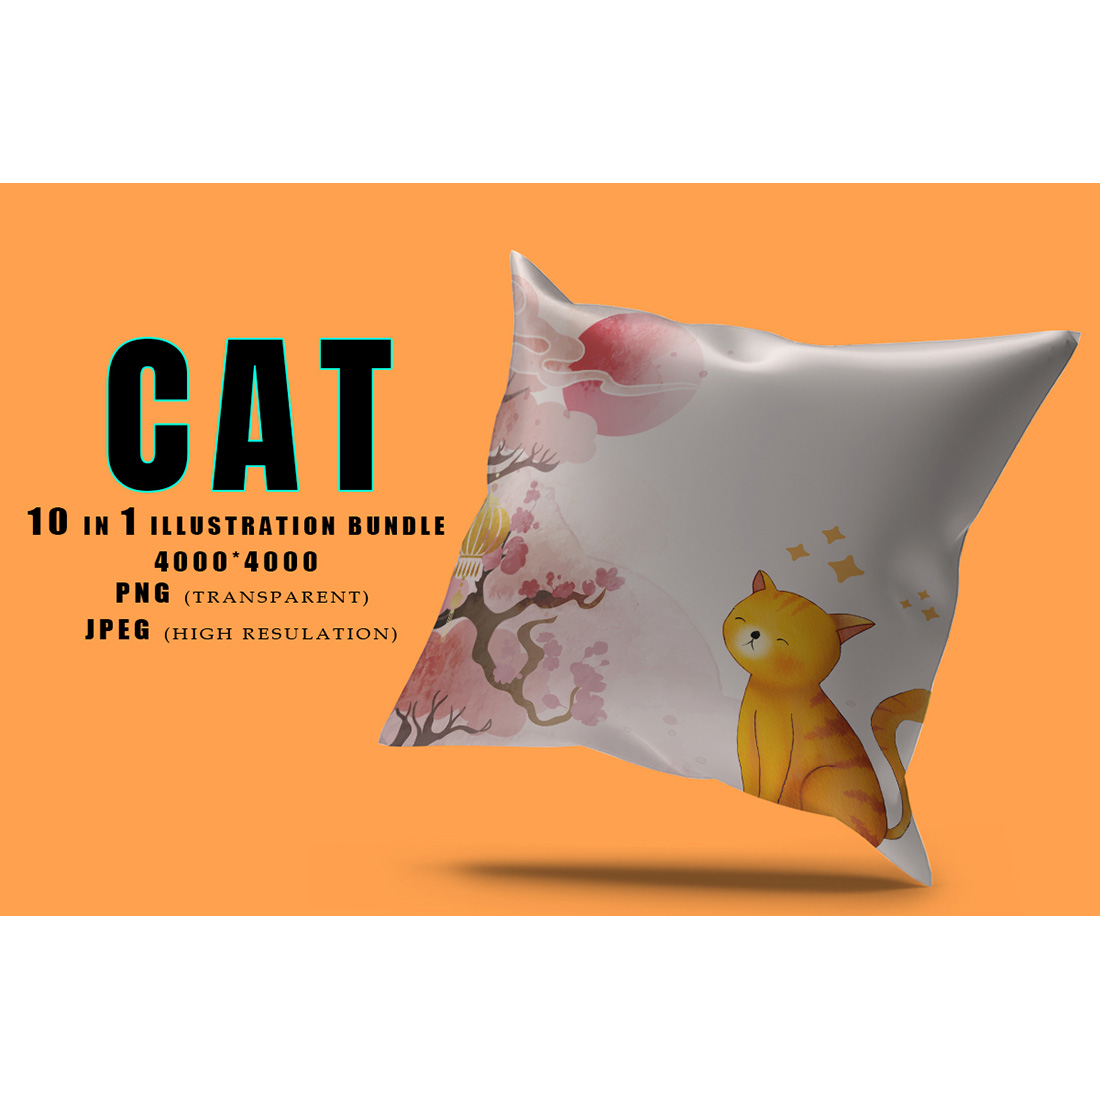 Image of pillow with colorful cat print